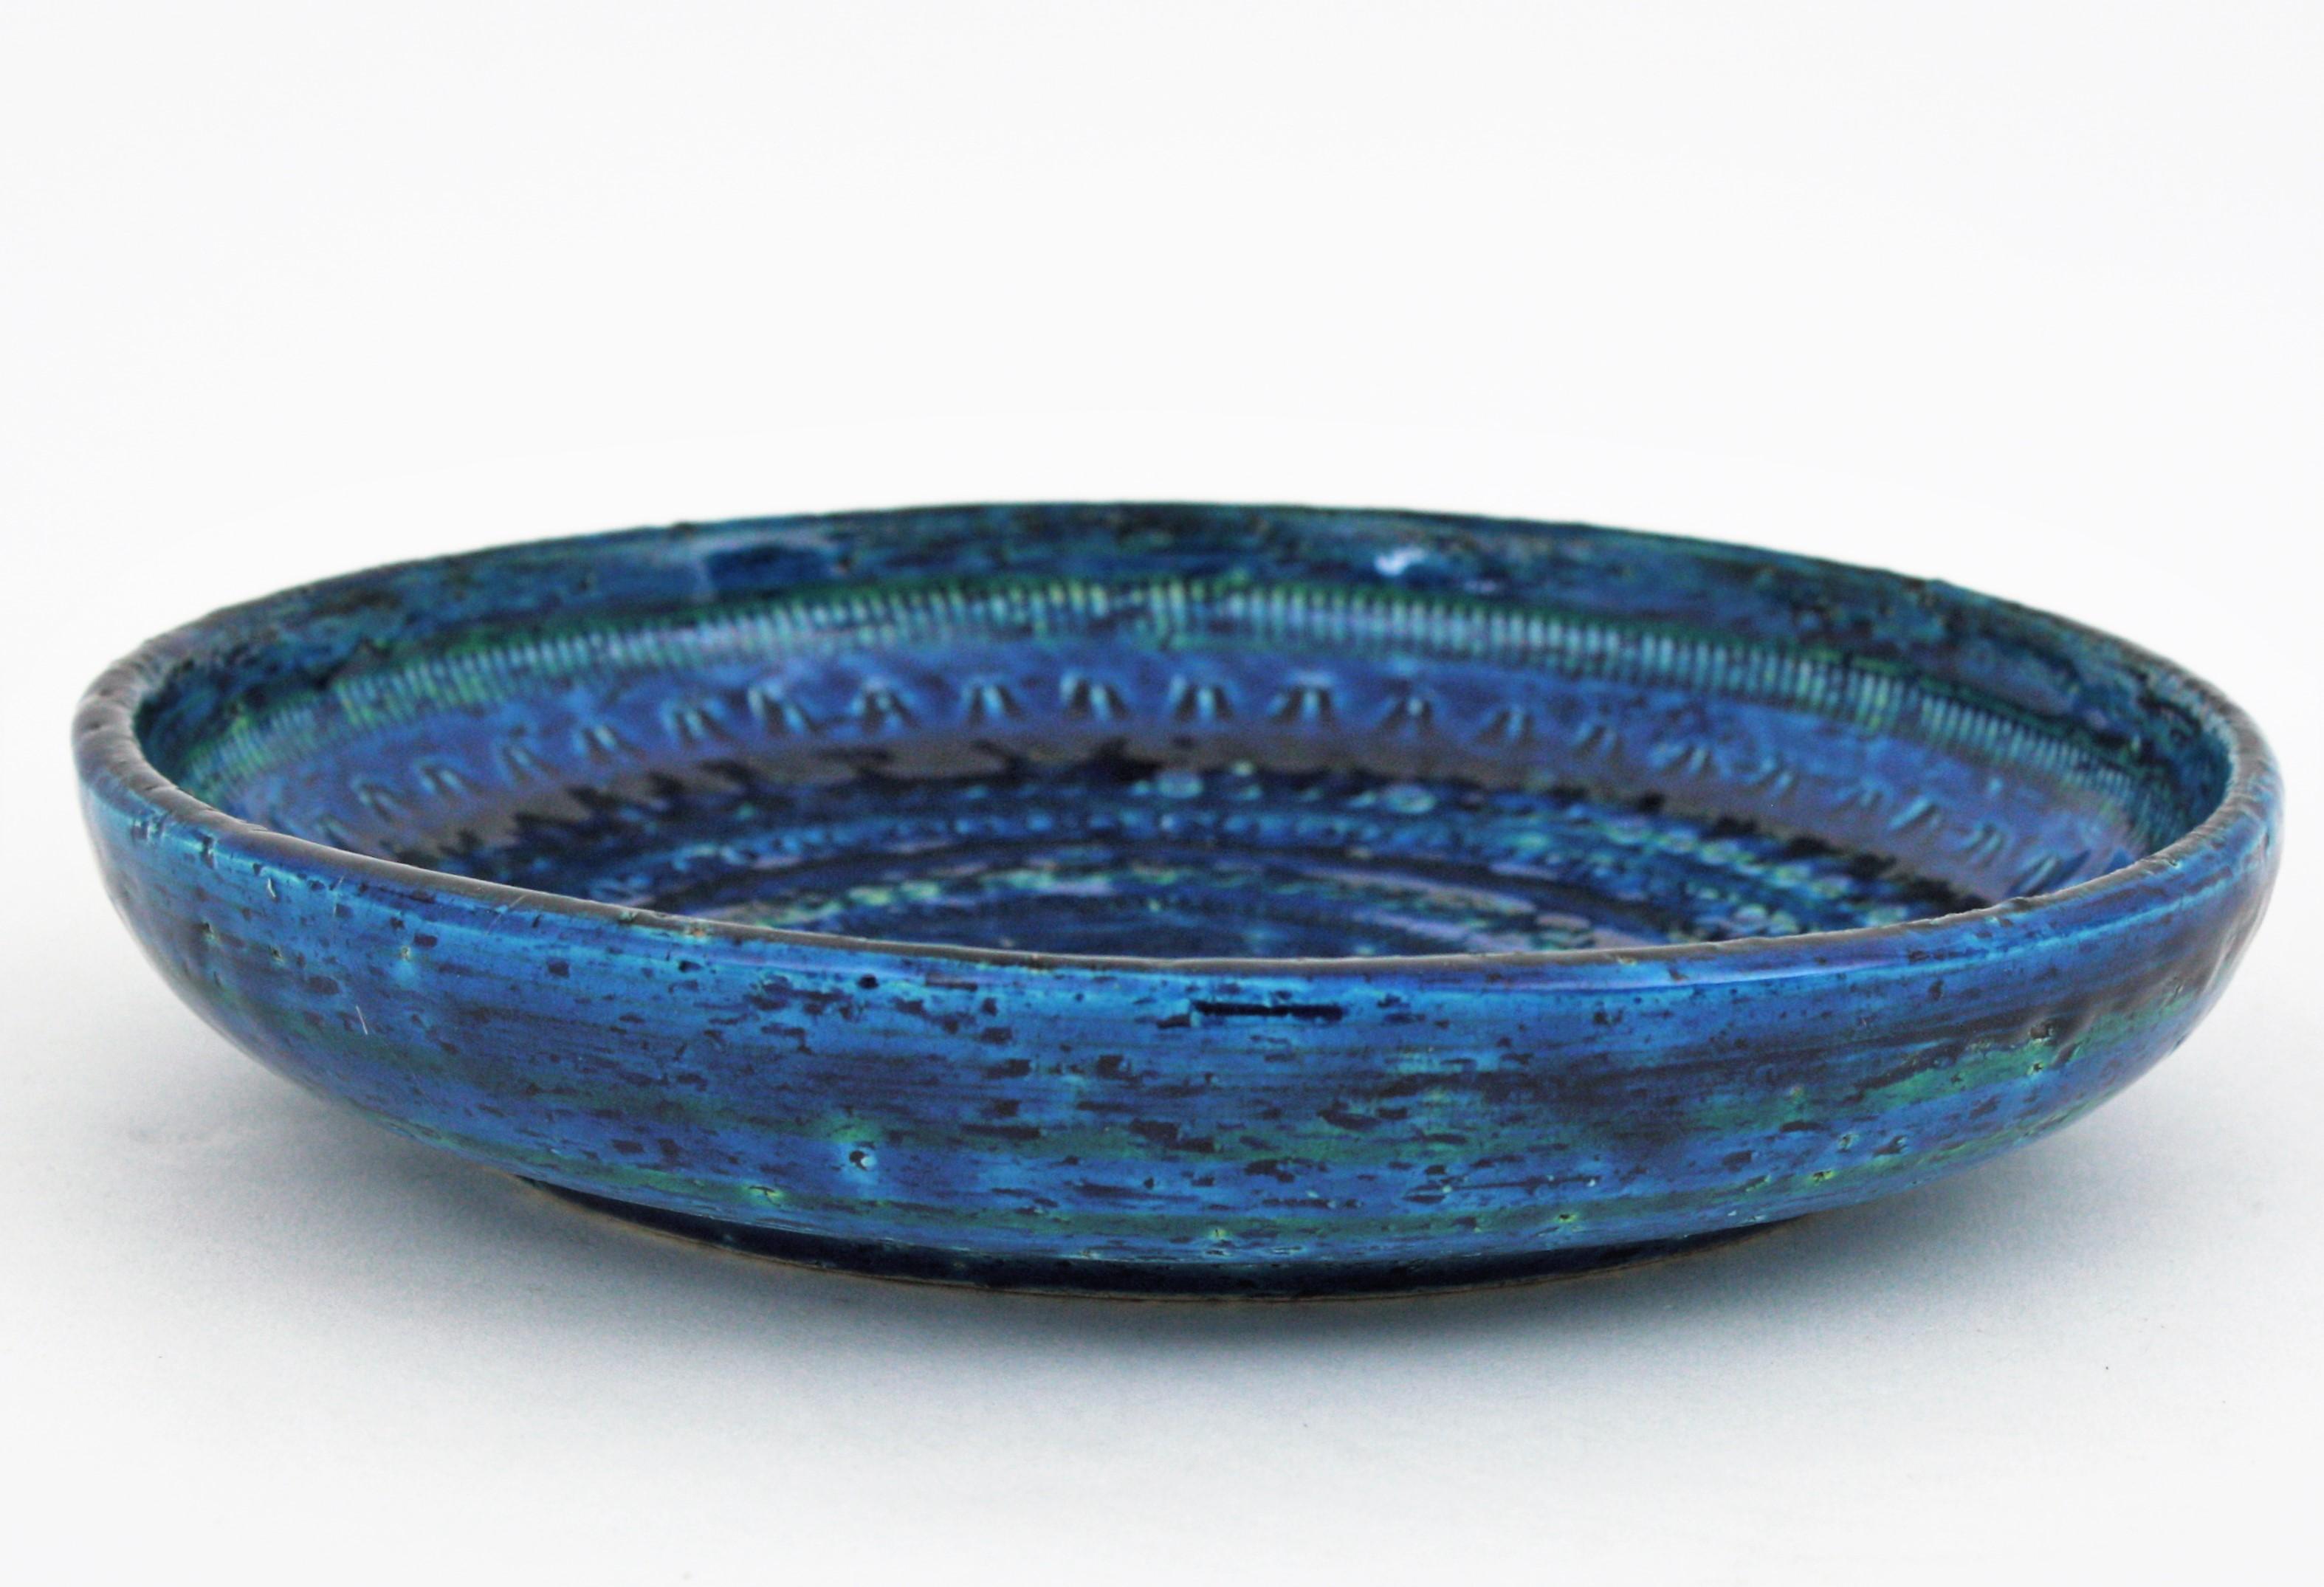 Italian midcentury Aldo Londi Bitossi Rimini blue glazed ceramic round plate or bowl, Italy, 1950-1960s.
Beautiful blue glazed (Rimini Blu) round ceramic bowl or vide-poche designed by Aldo Londi and manufactured by Bitossi.
Handcrafted in Italy